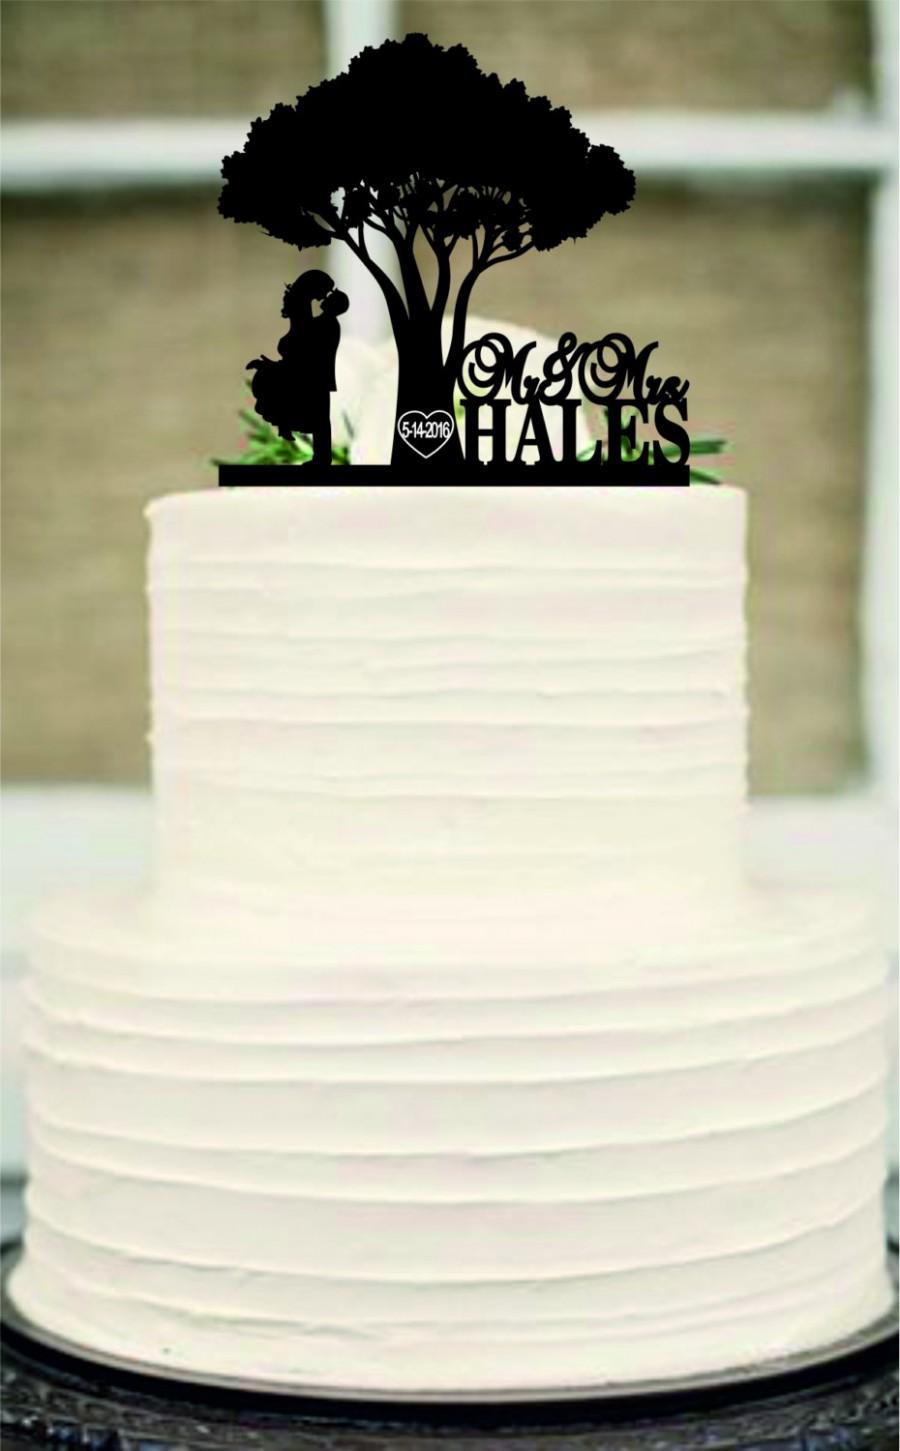 Wedding - Rustic Wedding Cake Topper-Custom Wedding Cake Topper-Personalized Monogram Cake Topper-Mr and Mrs Cake Topper-Bride and Groom a cat or dog